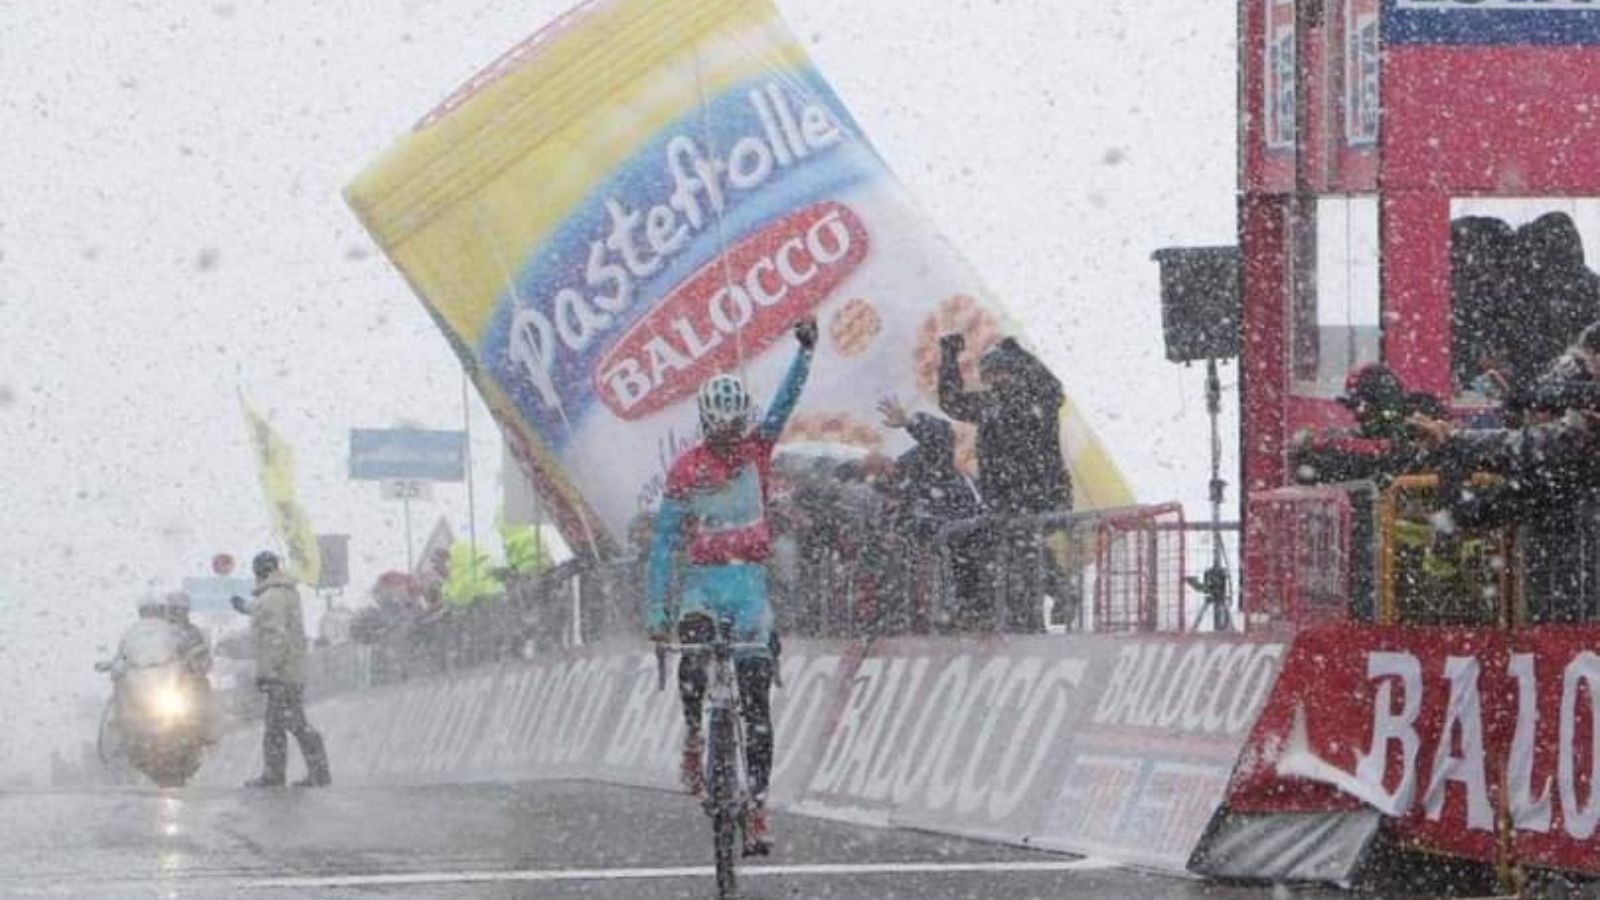 Vincenzo Nibali riding in pink jersey on the snow day of stage 20 at Giro d'Italia 2013